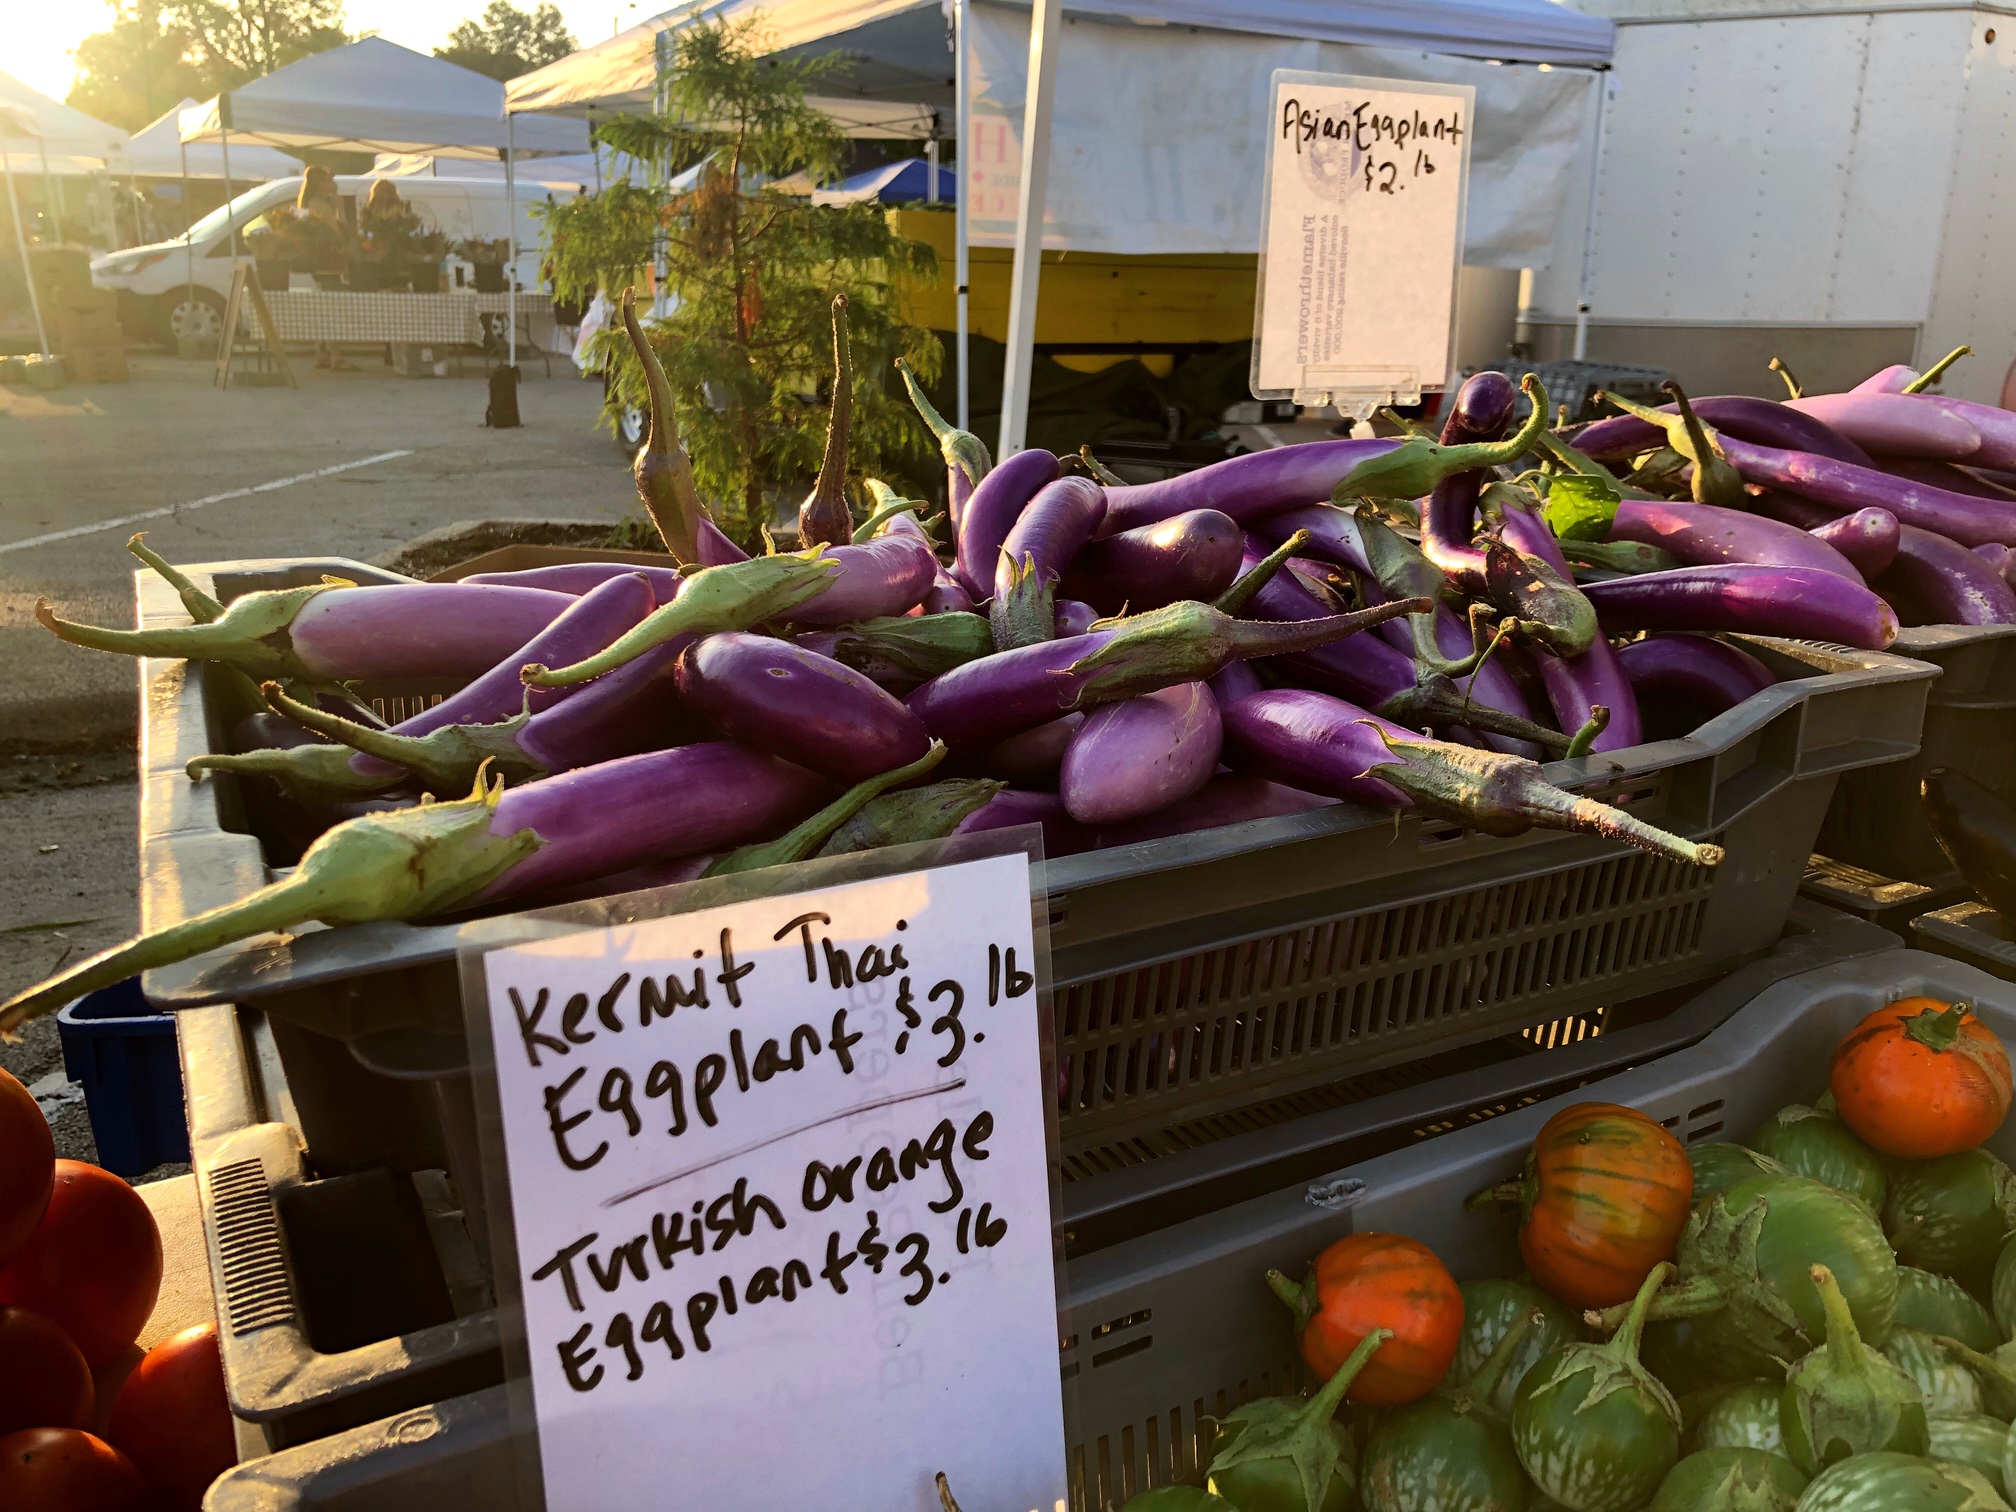 Skinny, purple Kermit Thai eggplants are in a gray basket to be sold at the Urbana Market in the Square. The morning light is coming through on the top left of the photo. Photo by Alyssa Buckley.